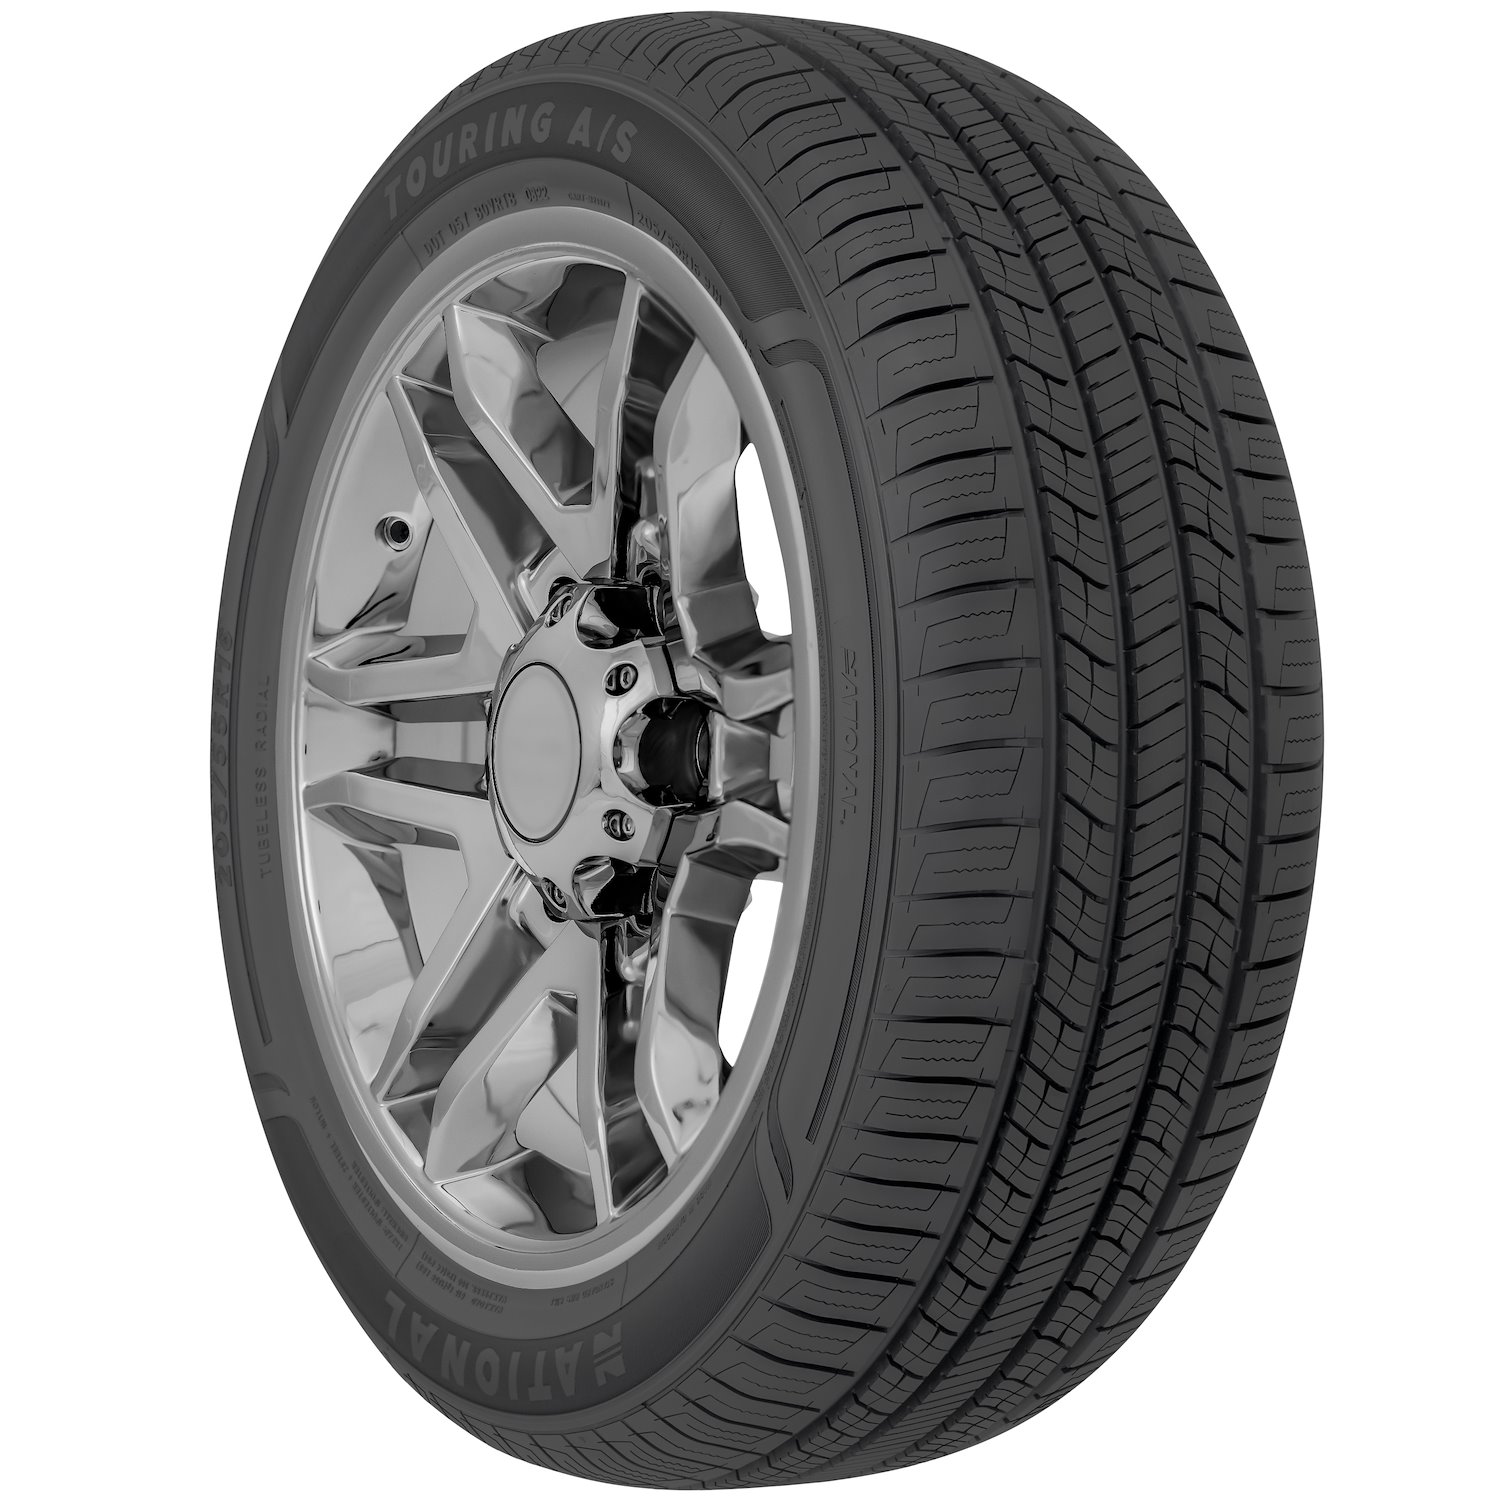 NLR30 Touring A/S Tire, 205/65R15